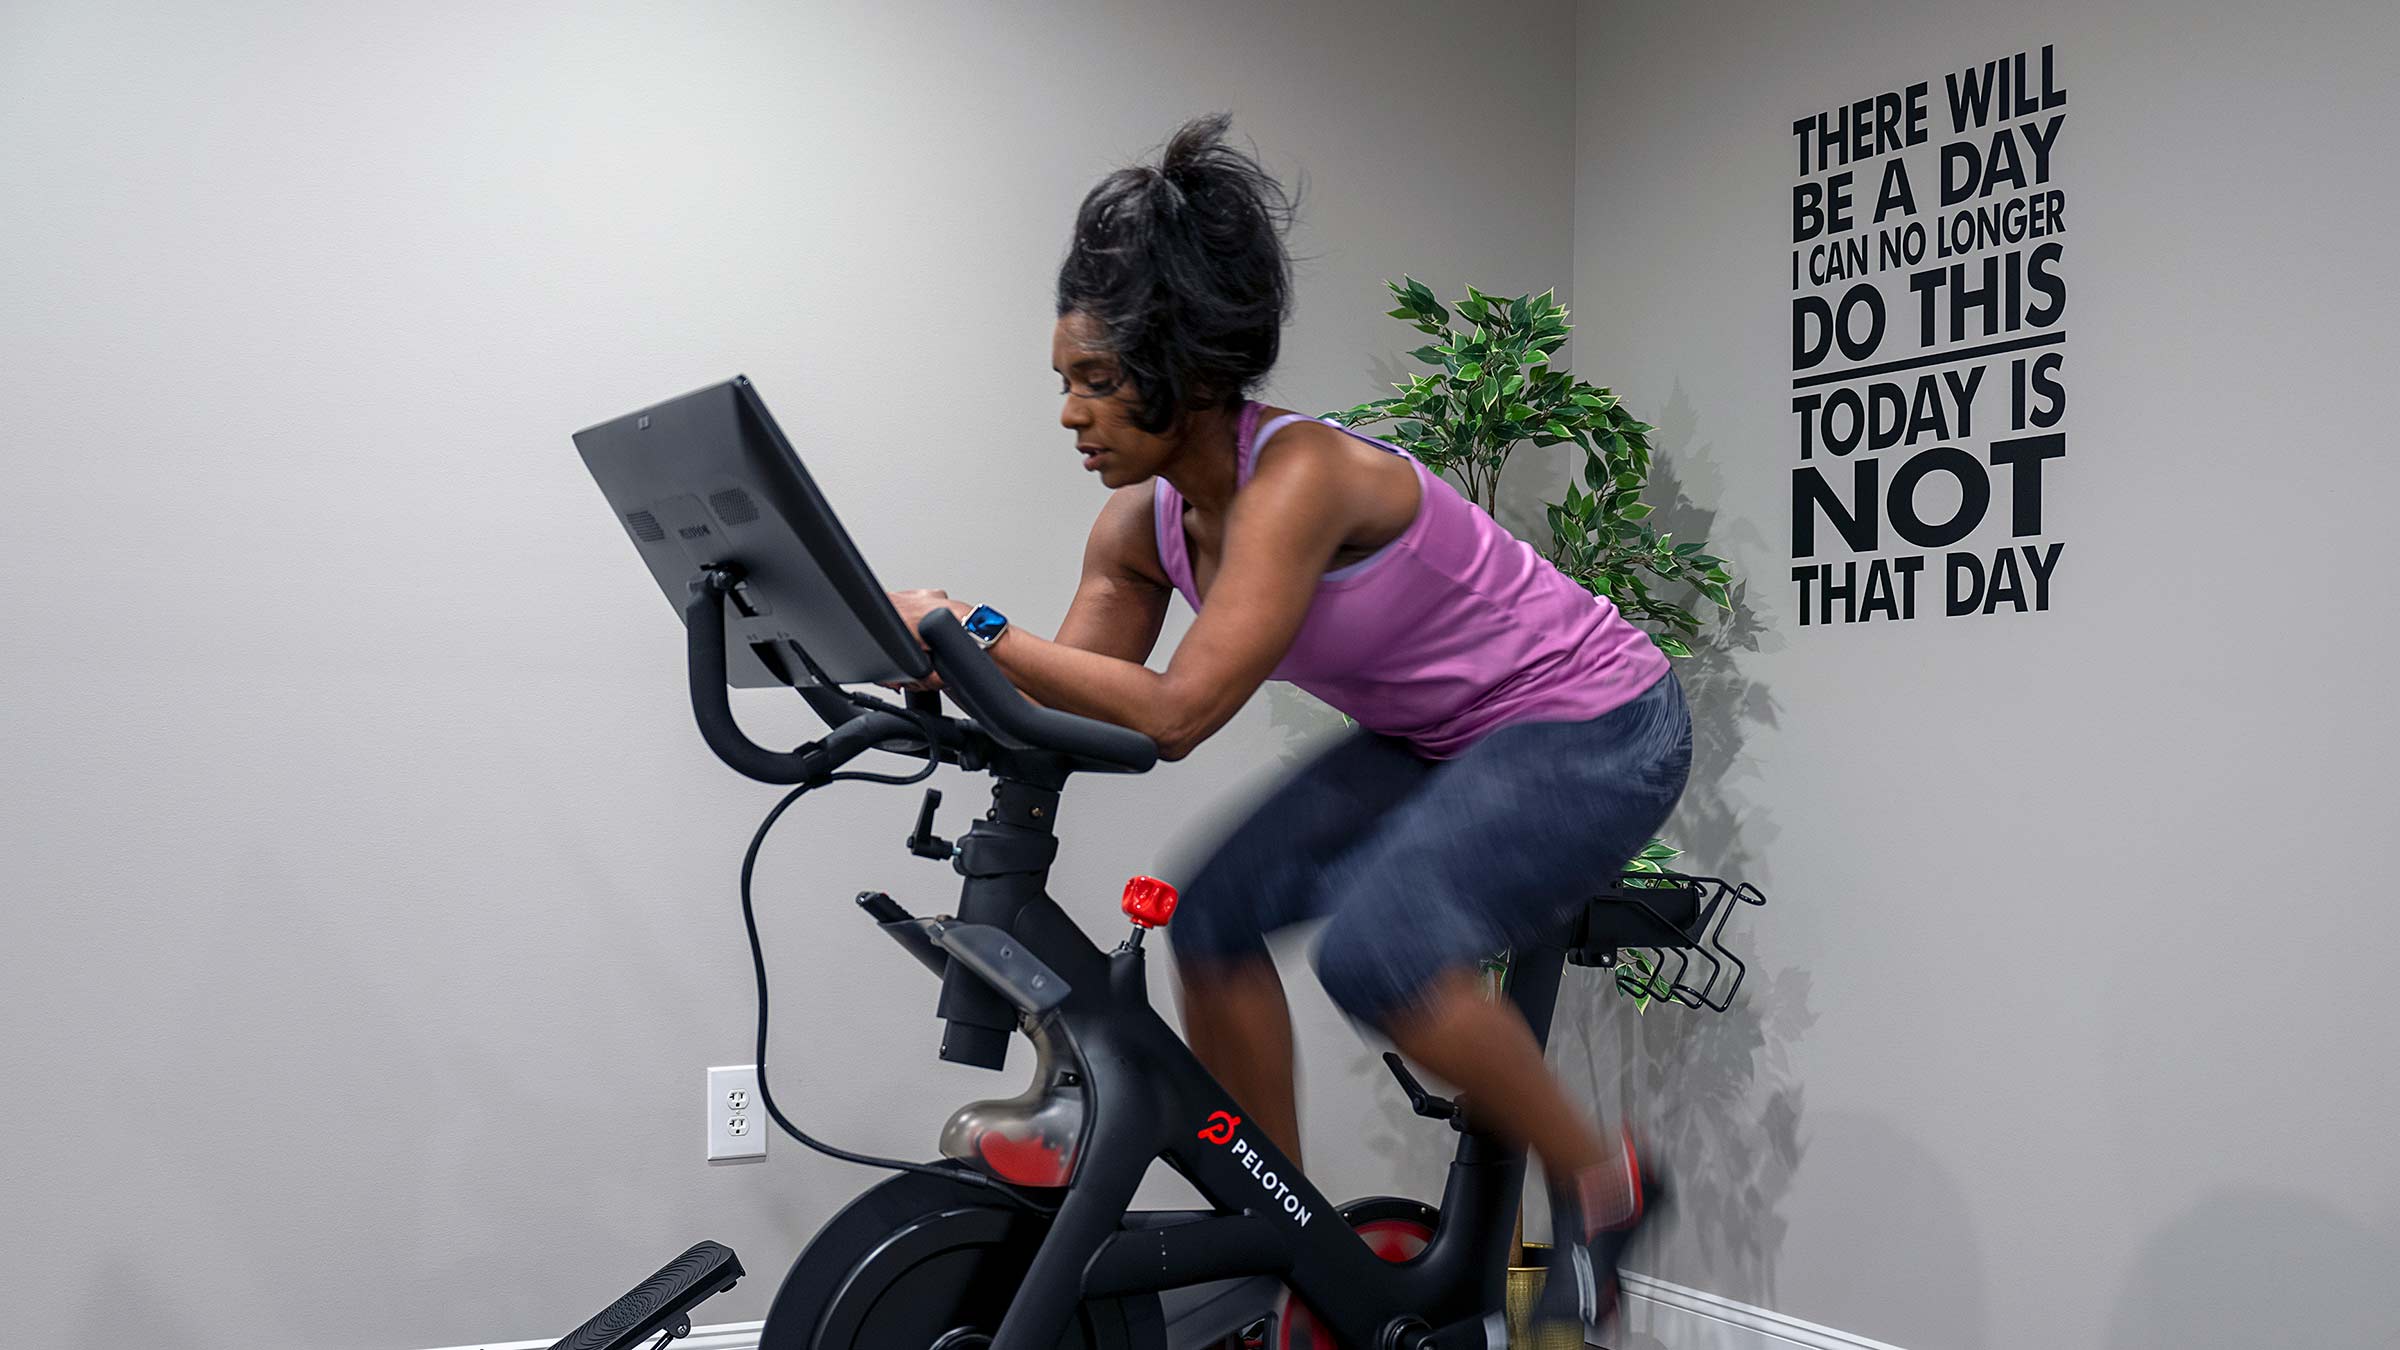 Paula Cole working out on a Peloton with the words on the wall behind her: "There will be a day I can no longer do this, today is not that day."